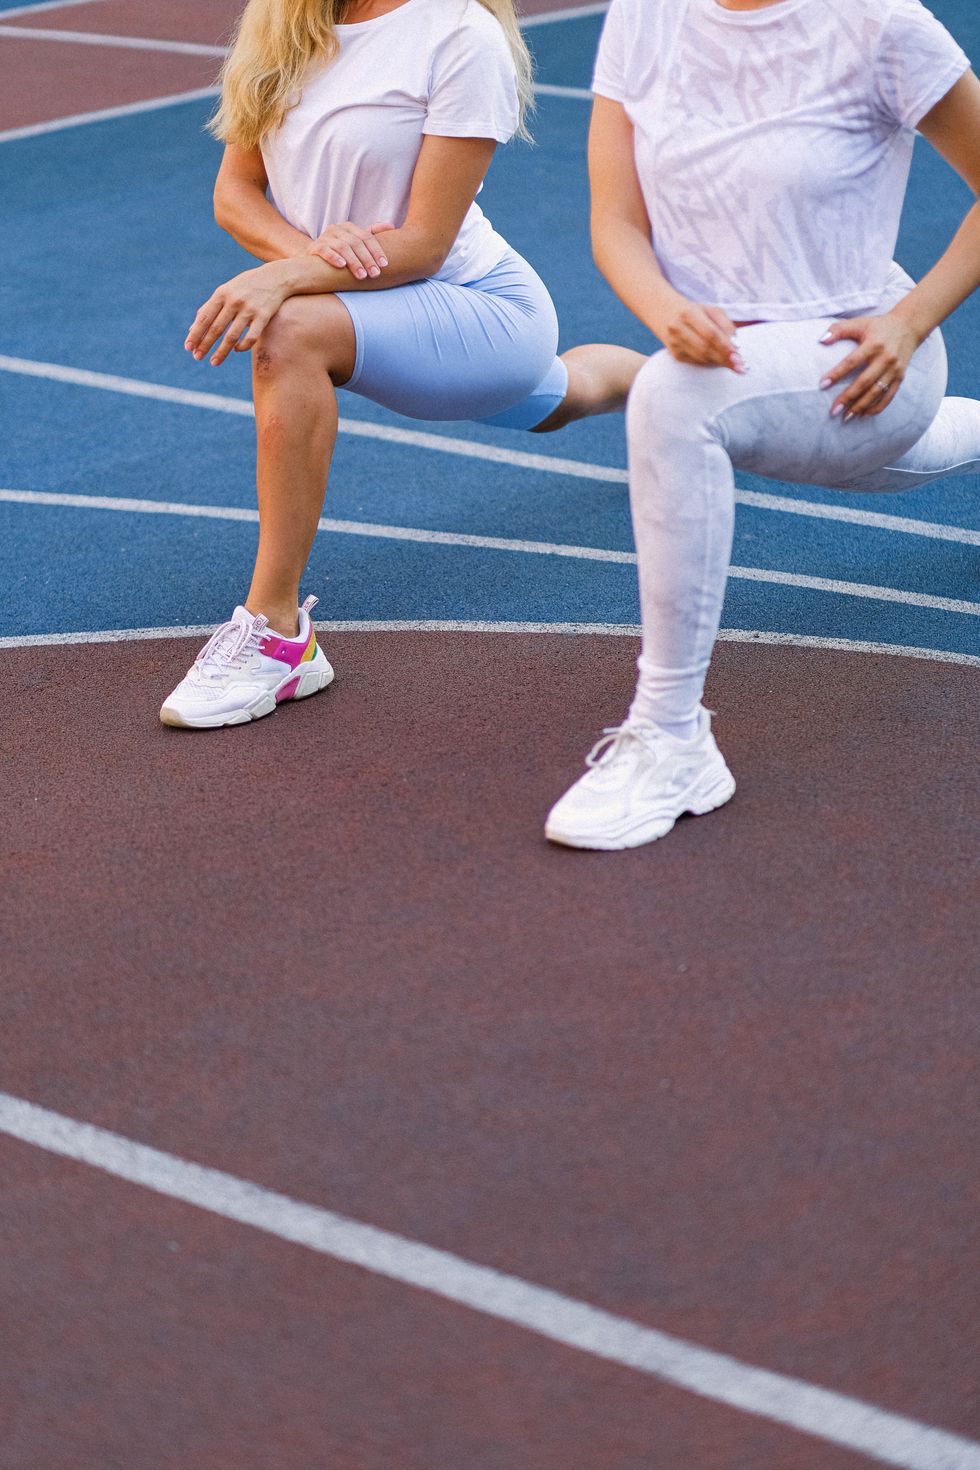 two people stretching on a track